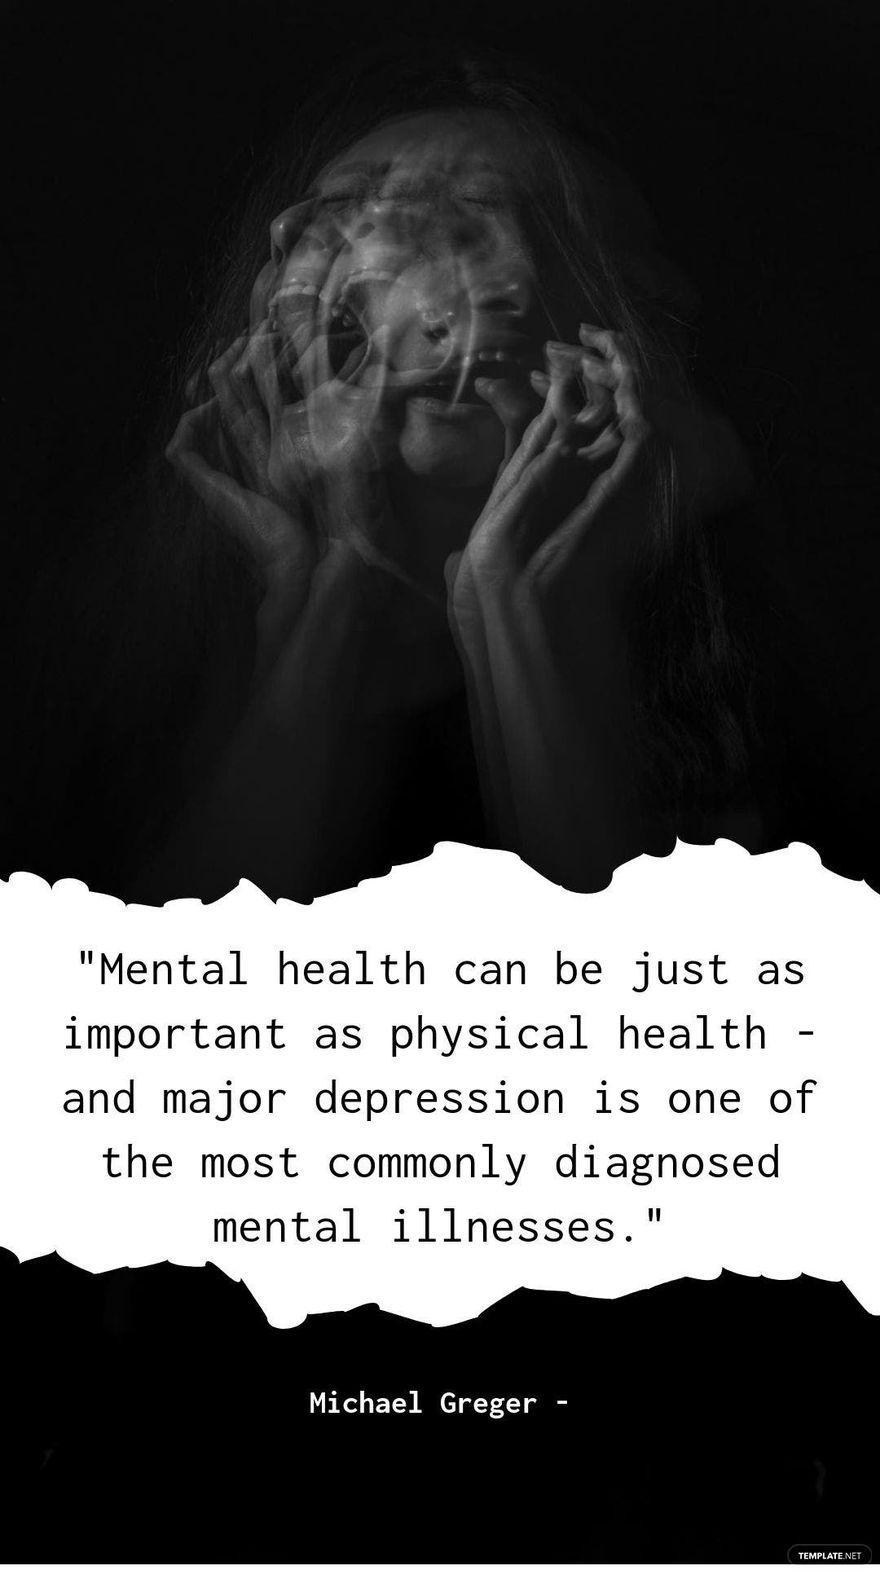 Michael Greger - Mental health can be just as important as physical health - and major depression is one of the most commonly diagnosed mental illnesses.